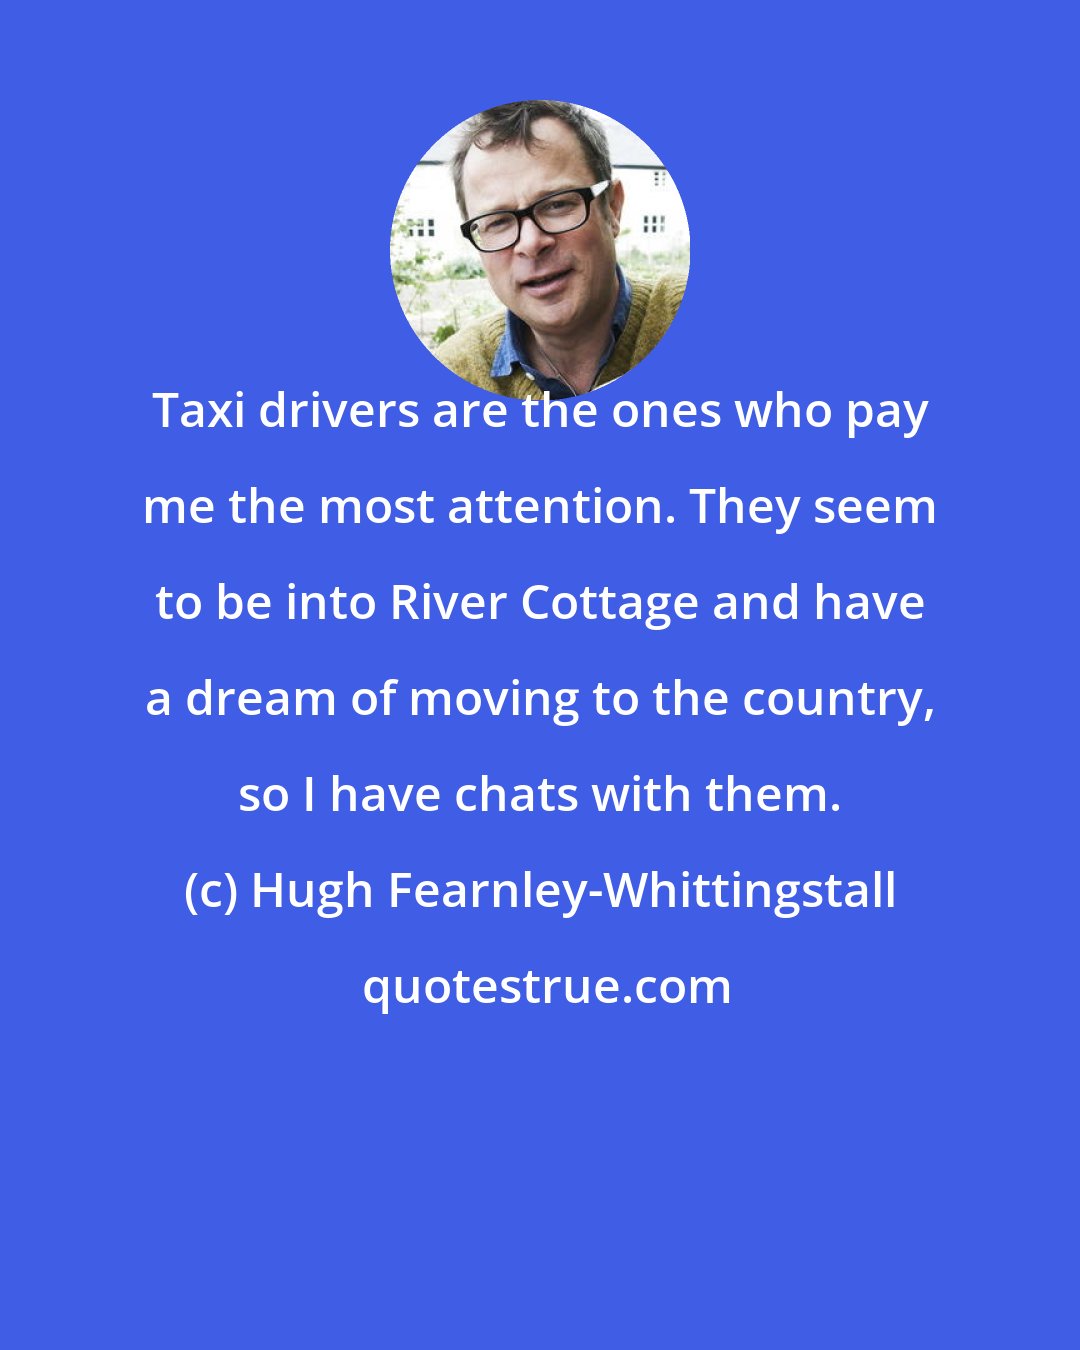 Hugh Fearnley-Whittingstall: Taxi drivers are the ones who pay me the most attention. They seem to be into River Cottage and have a dream of moving to the country, so I have chats with them.